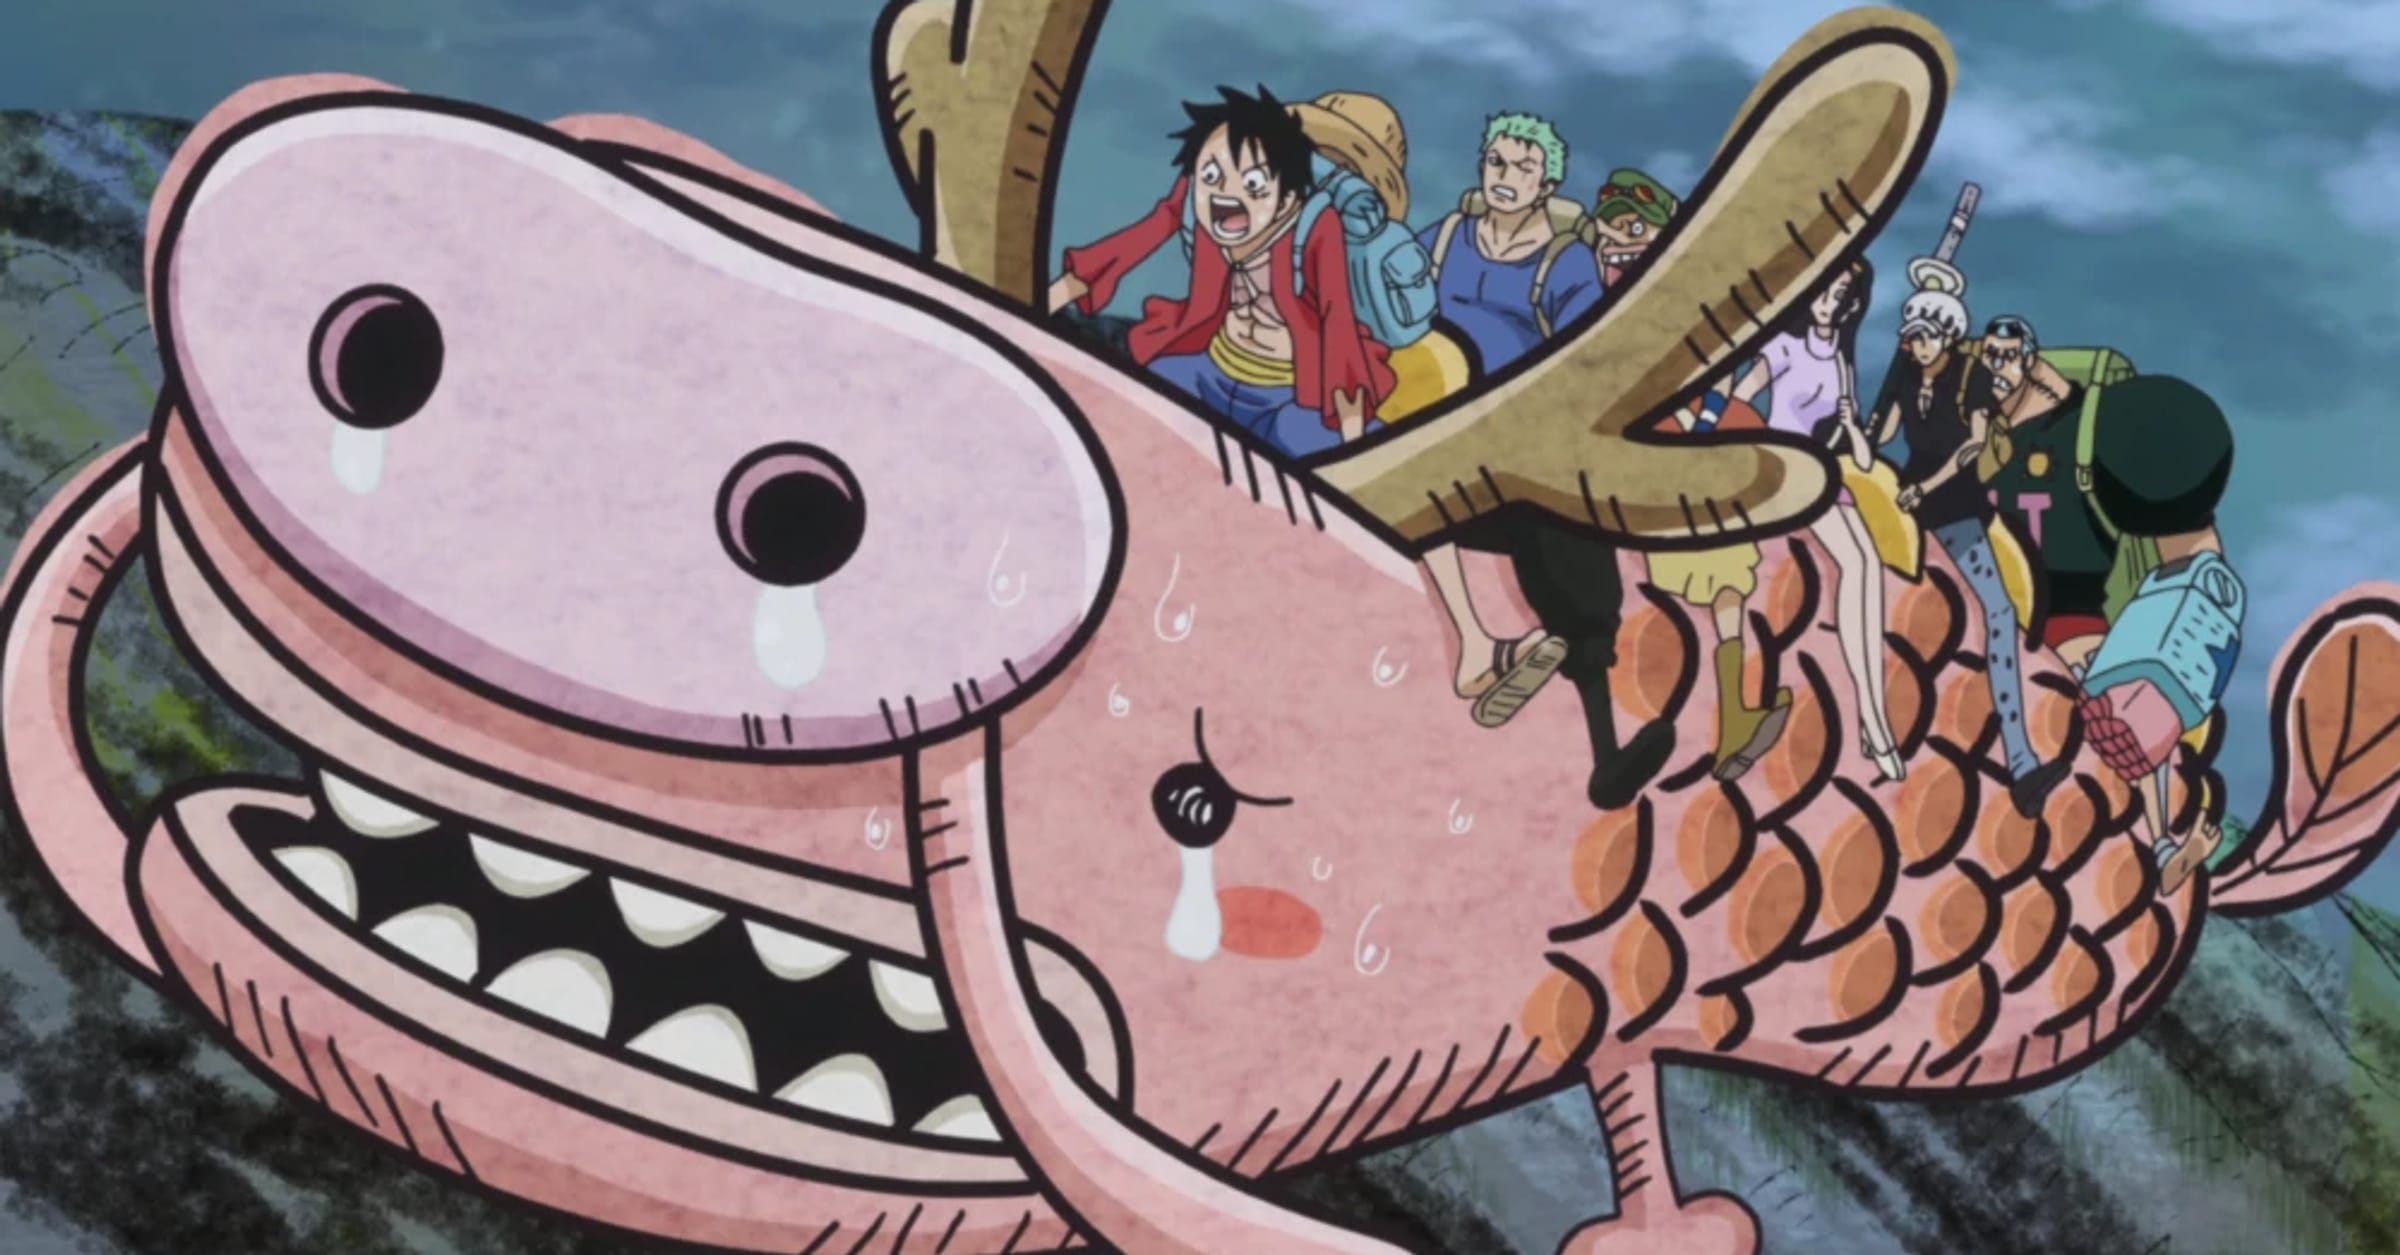 What are some of the worst Devil Fruit powers in One Piece? What